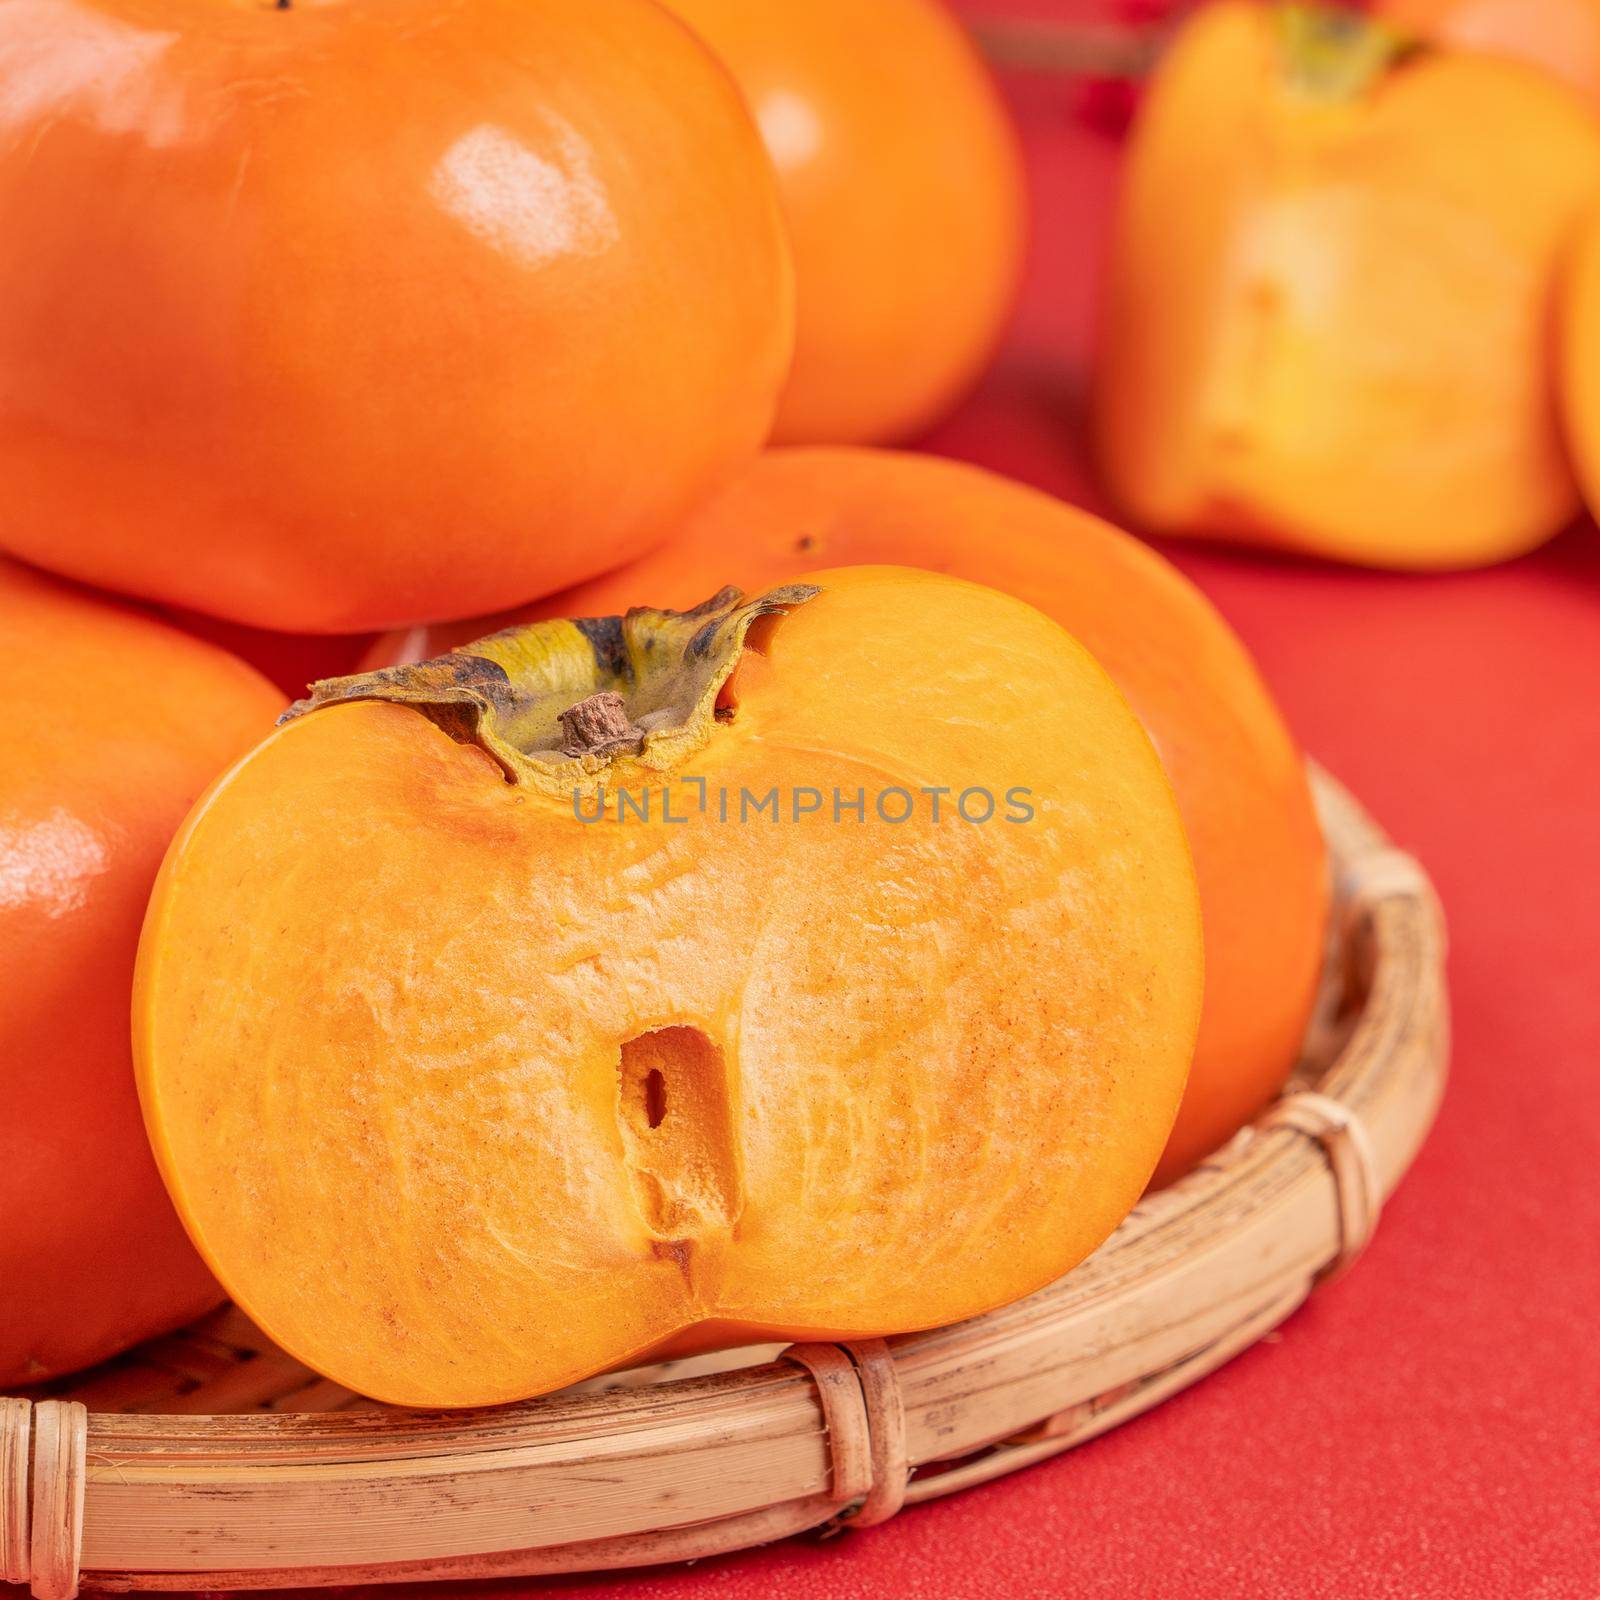 Fresh beautiful sliced sweet persimmon kaki isolated on red table background and bamboo sieve, Chinese lunar new year design concept, close up.